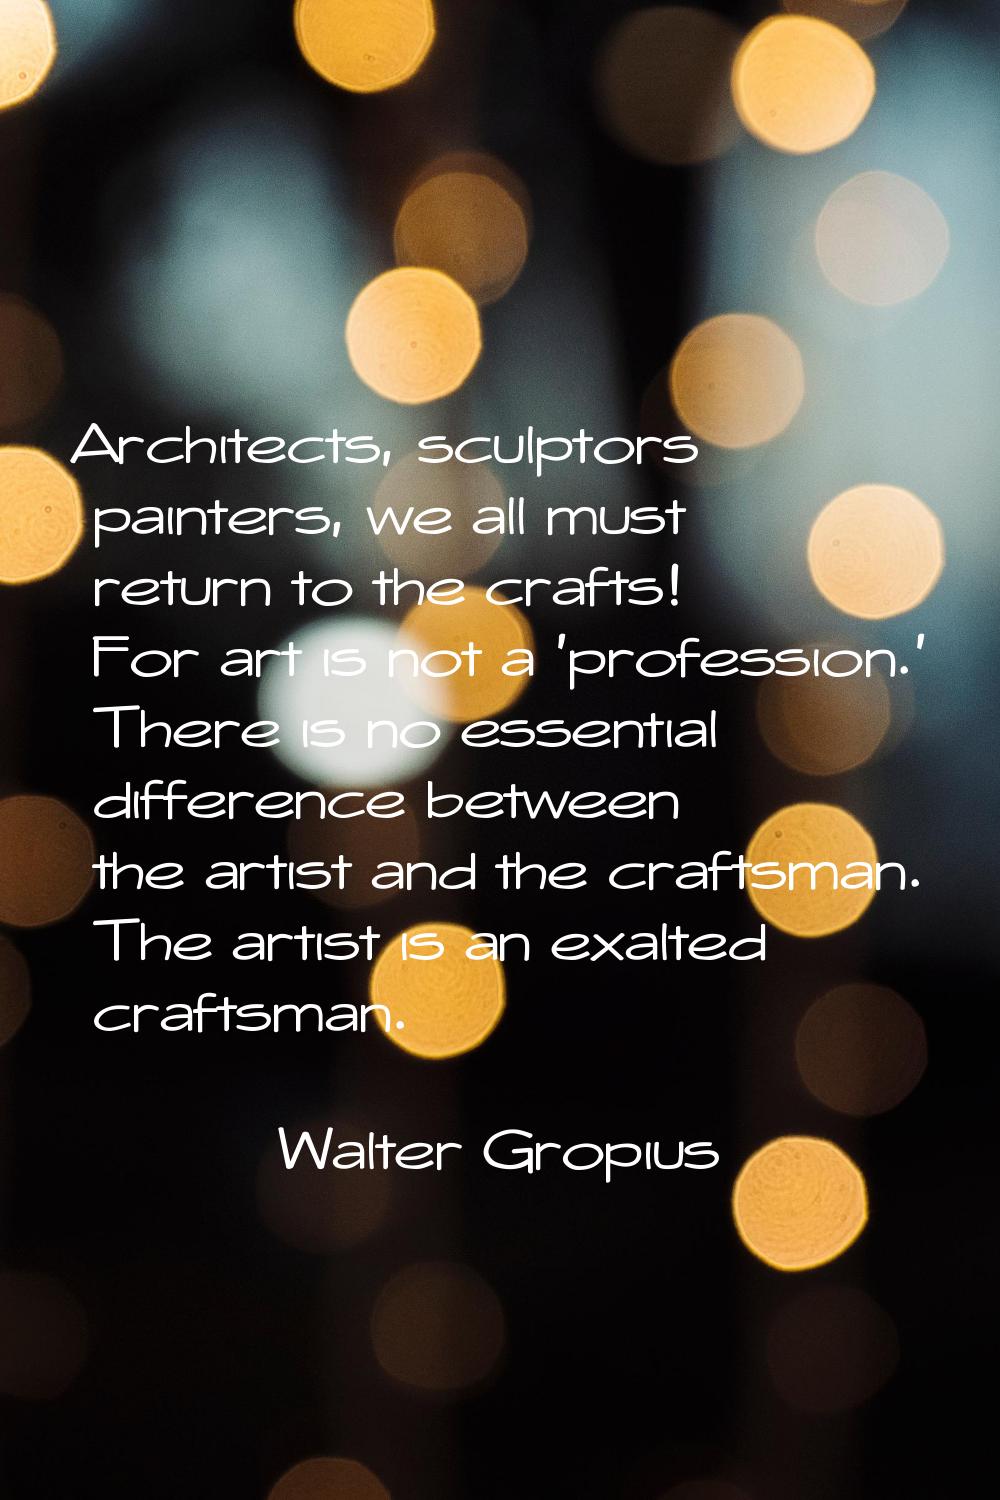 Architects, sculptors painters, we all must return to the crafts! For art is not a 'profession.' Th